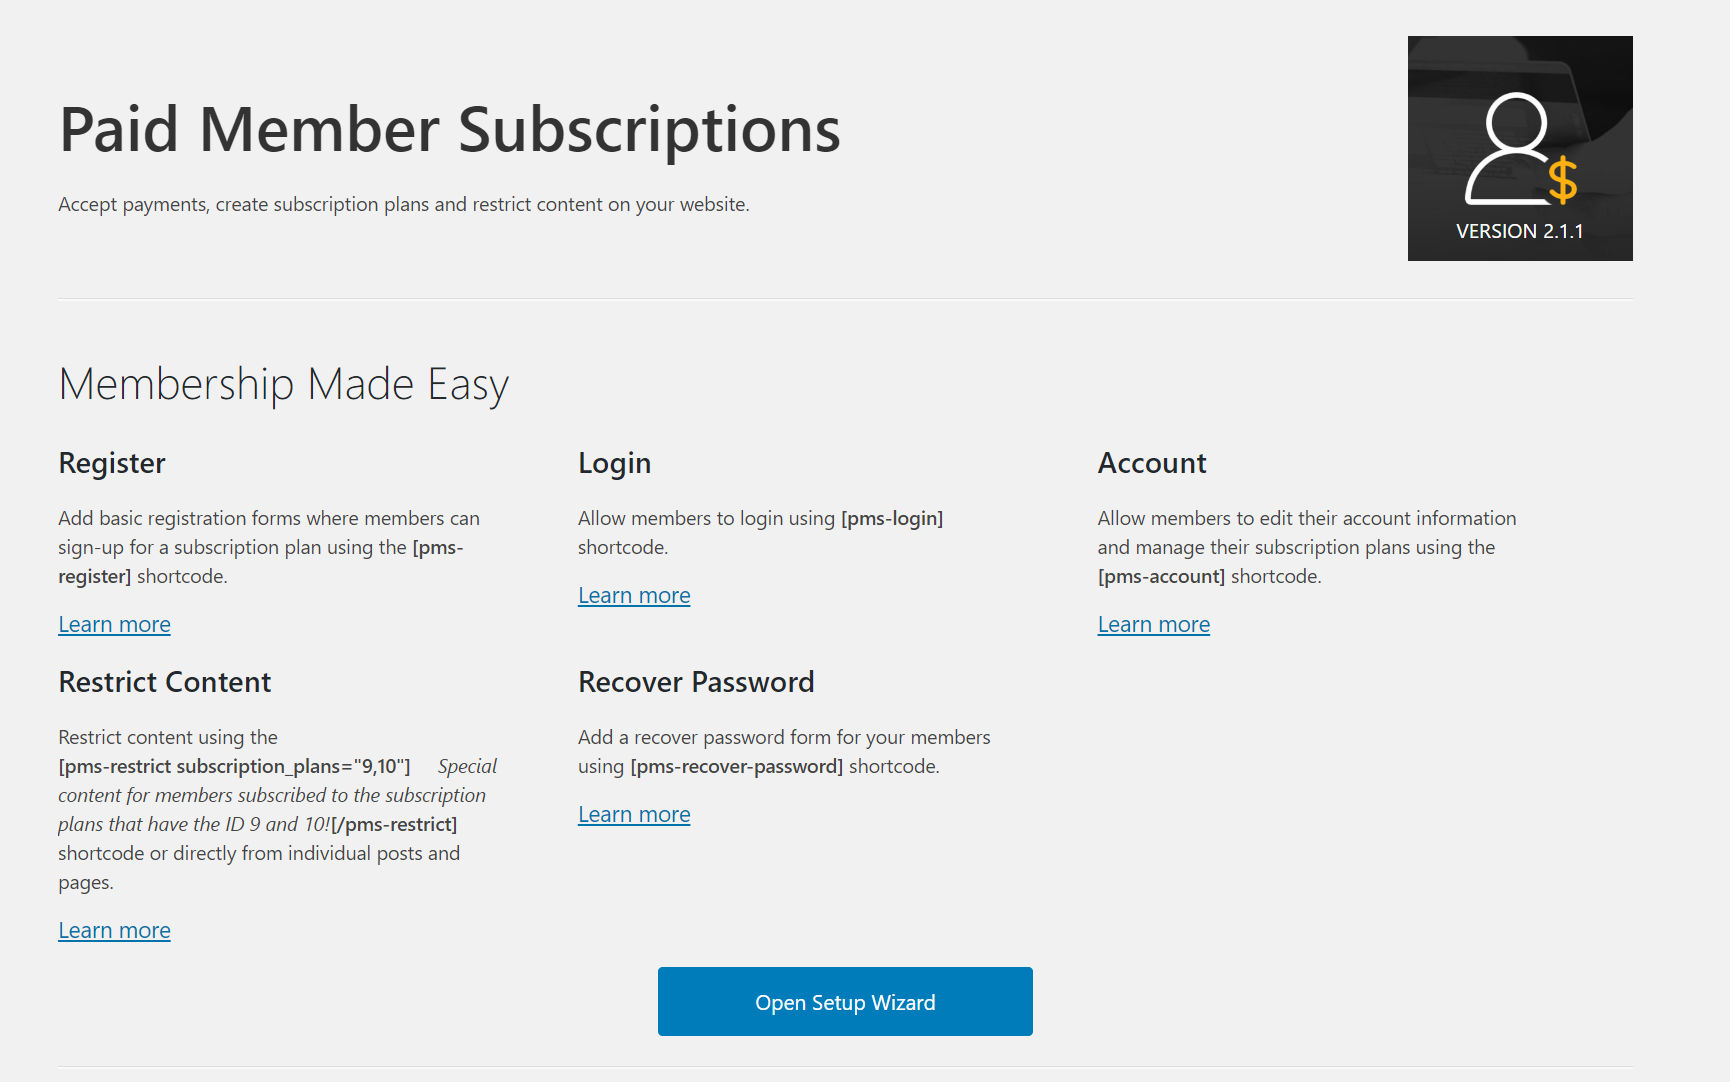 Paid Member Subscriptions dashboard